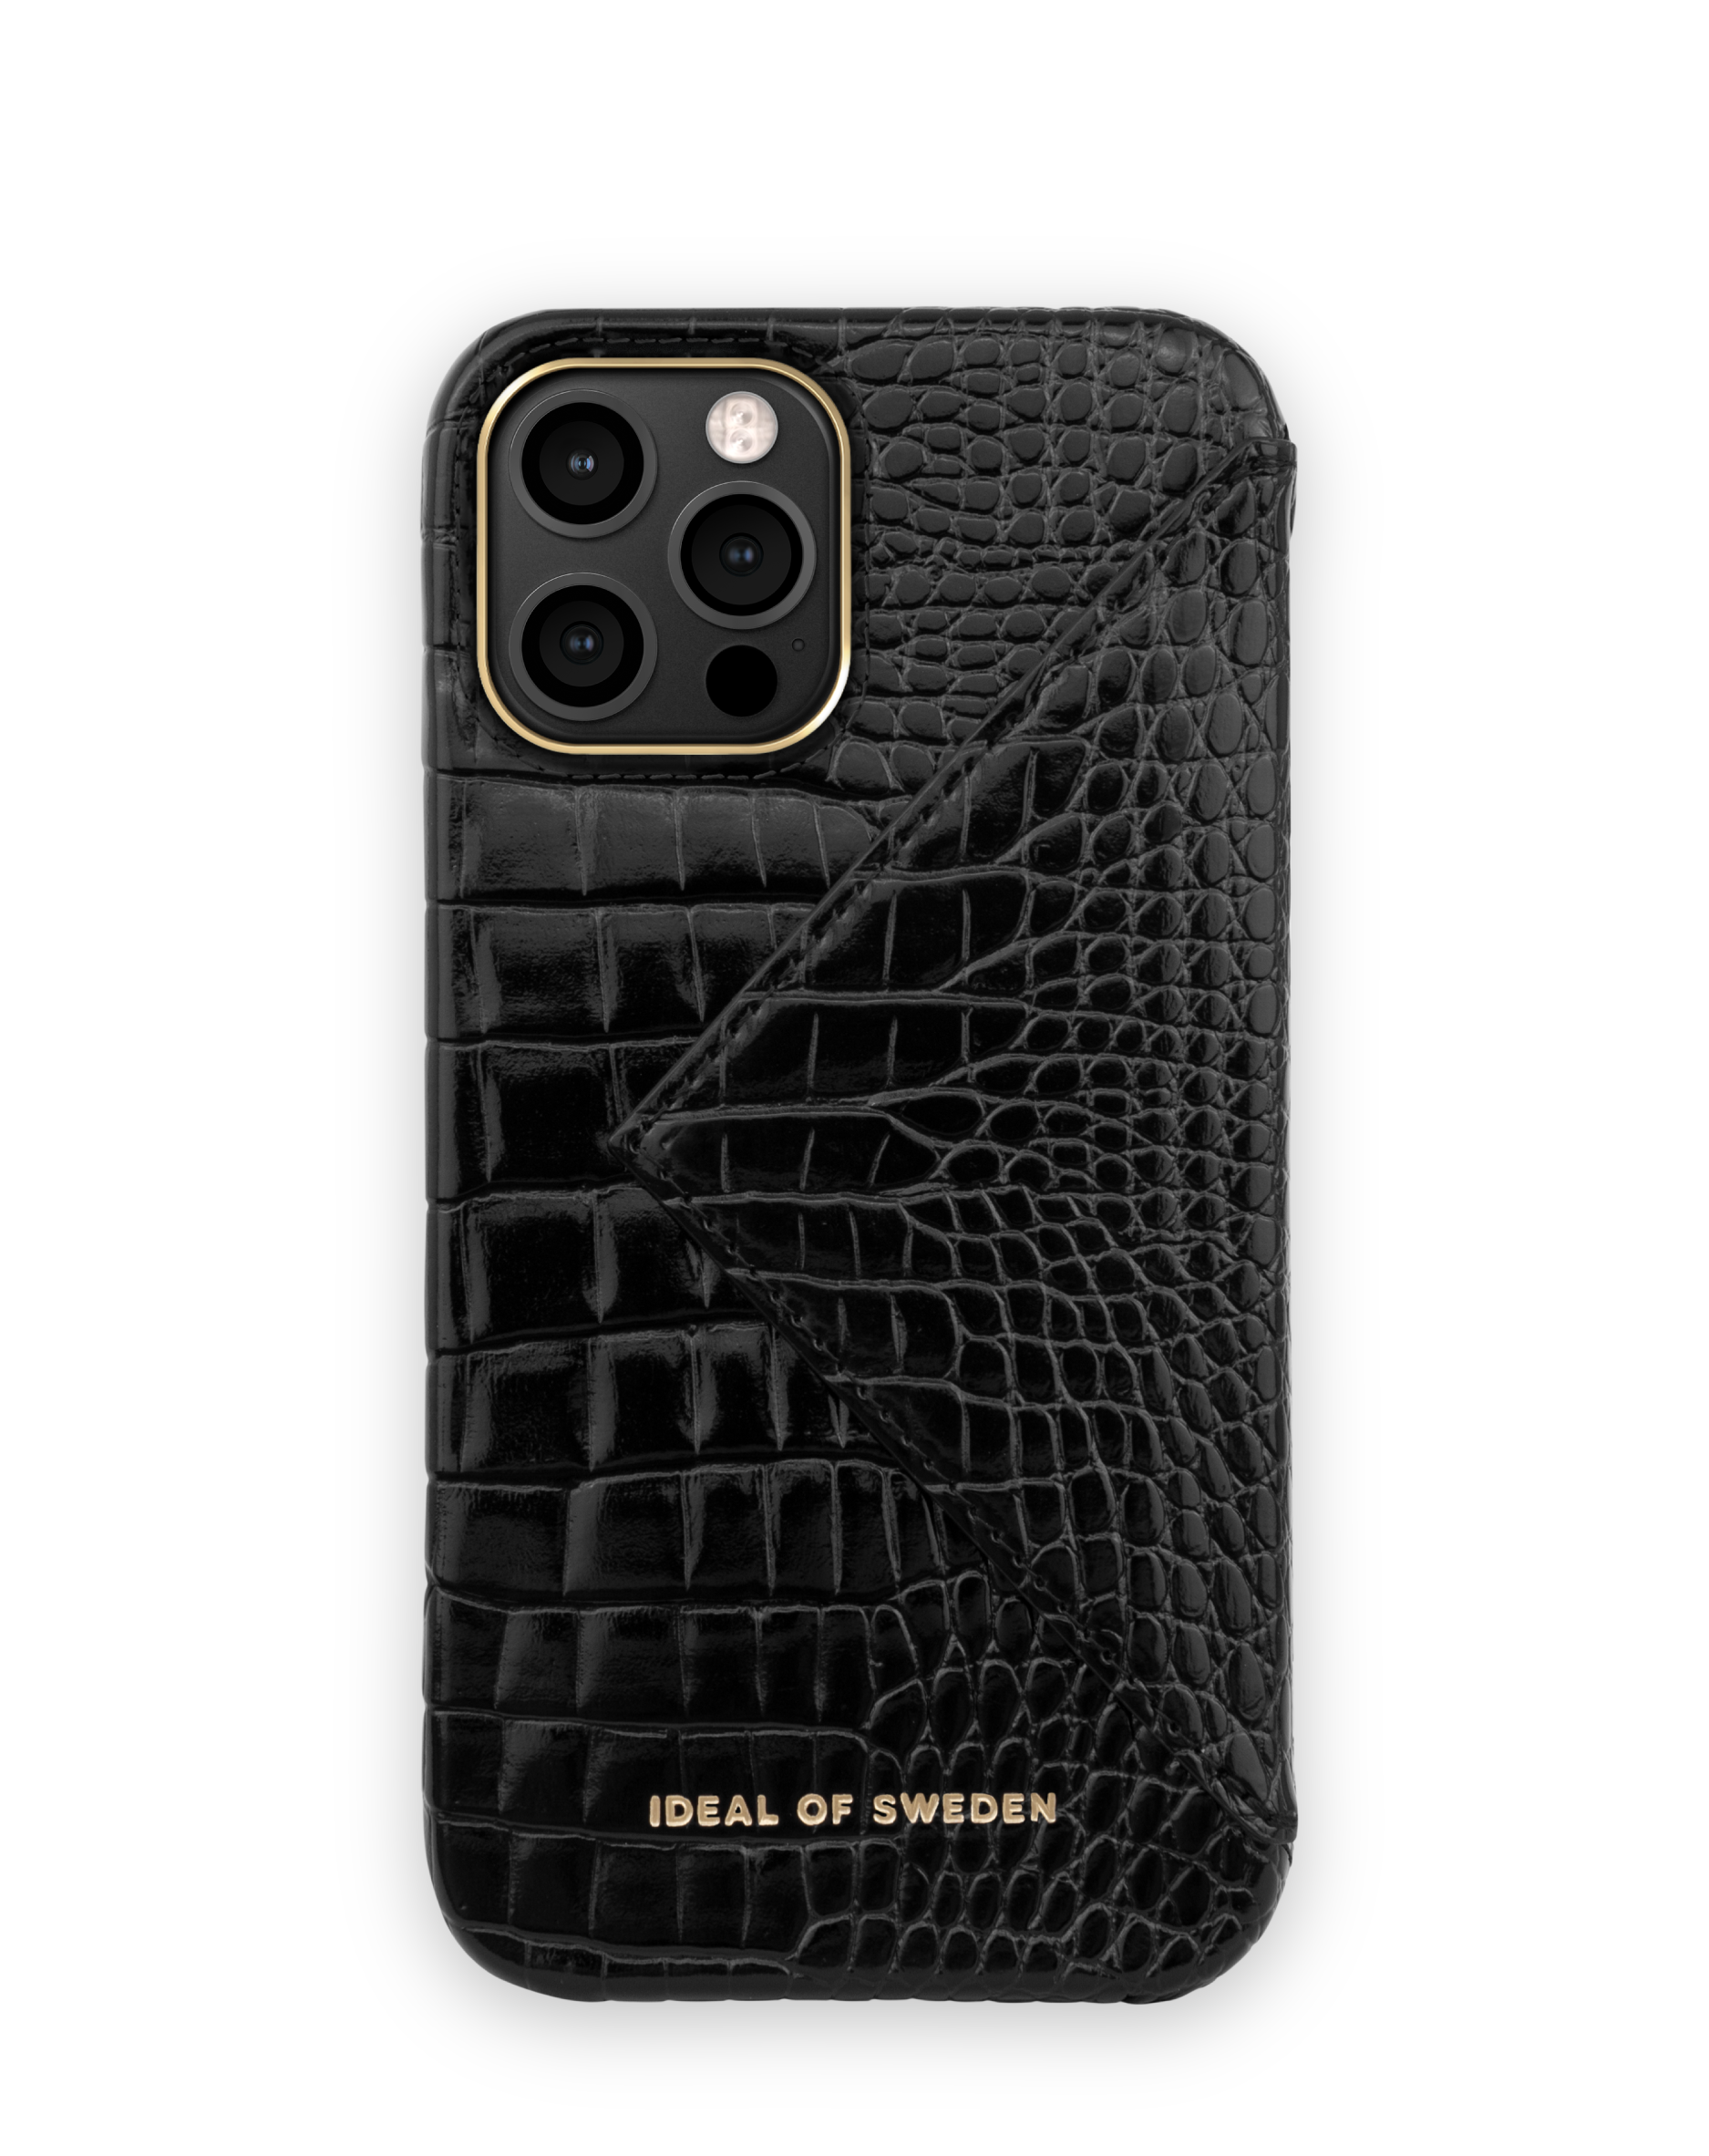 IPhone Pro Backcover, Noir IDSCAW20-2067, SWEDEN Apple, Max, 12 Croco OF IDEAL Neo